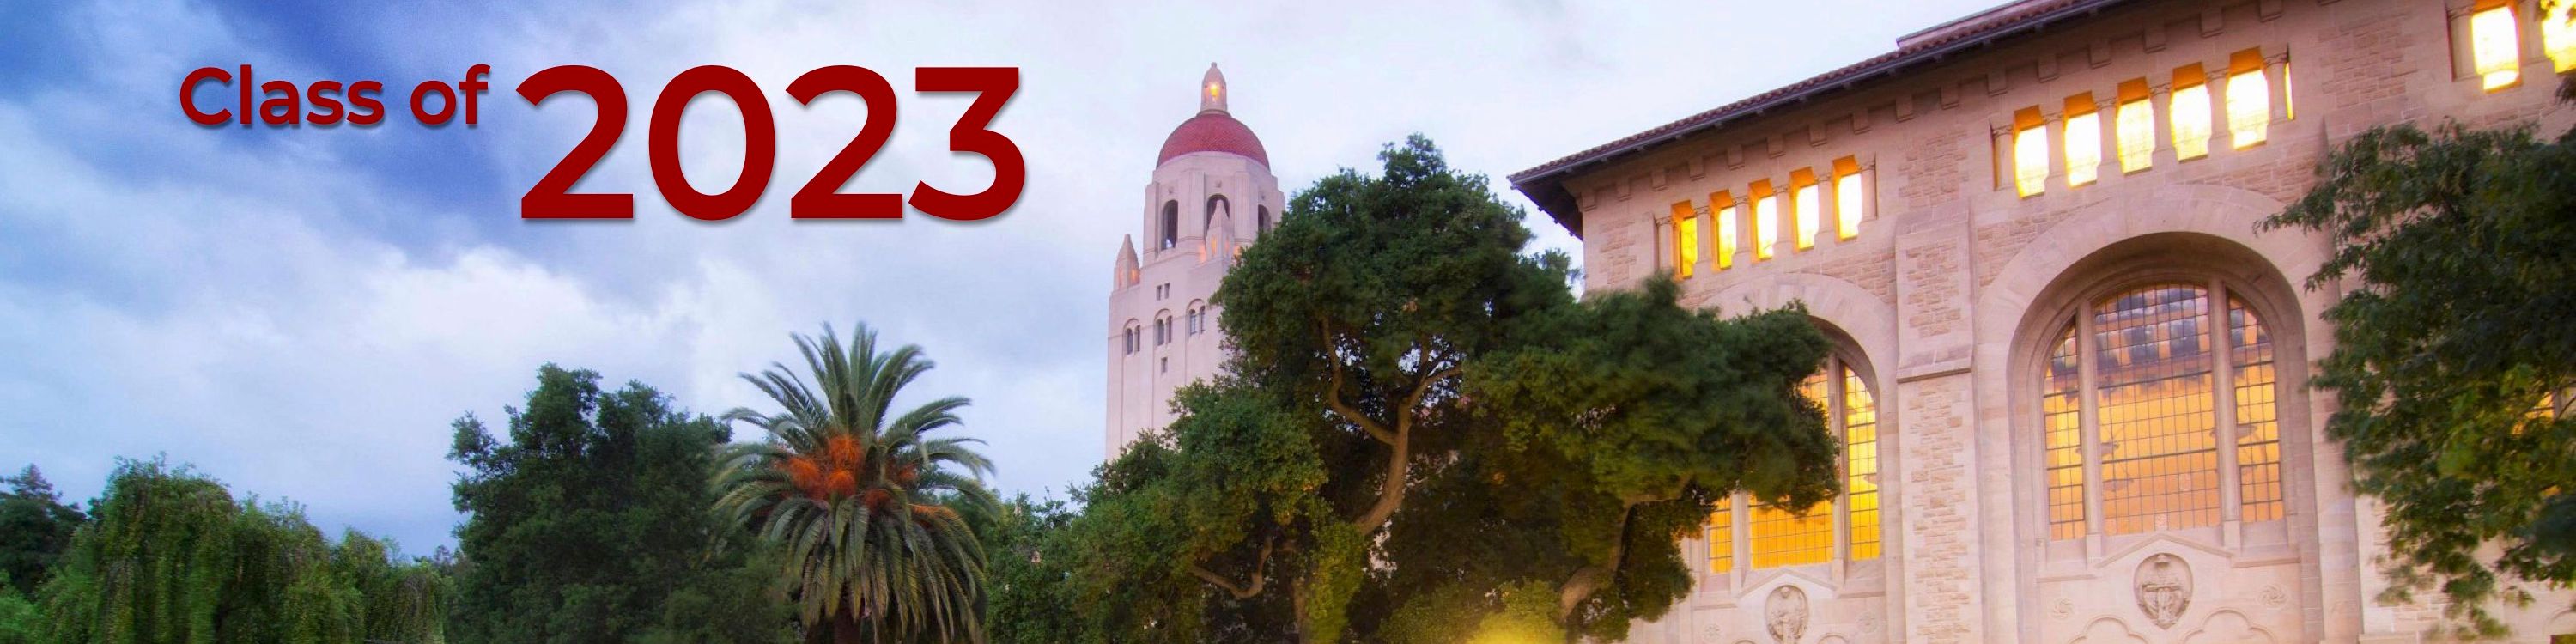 Stanford Class of 2023